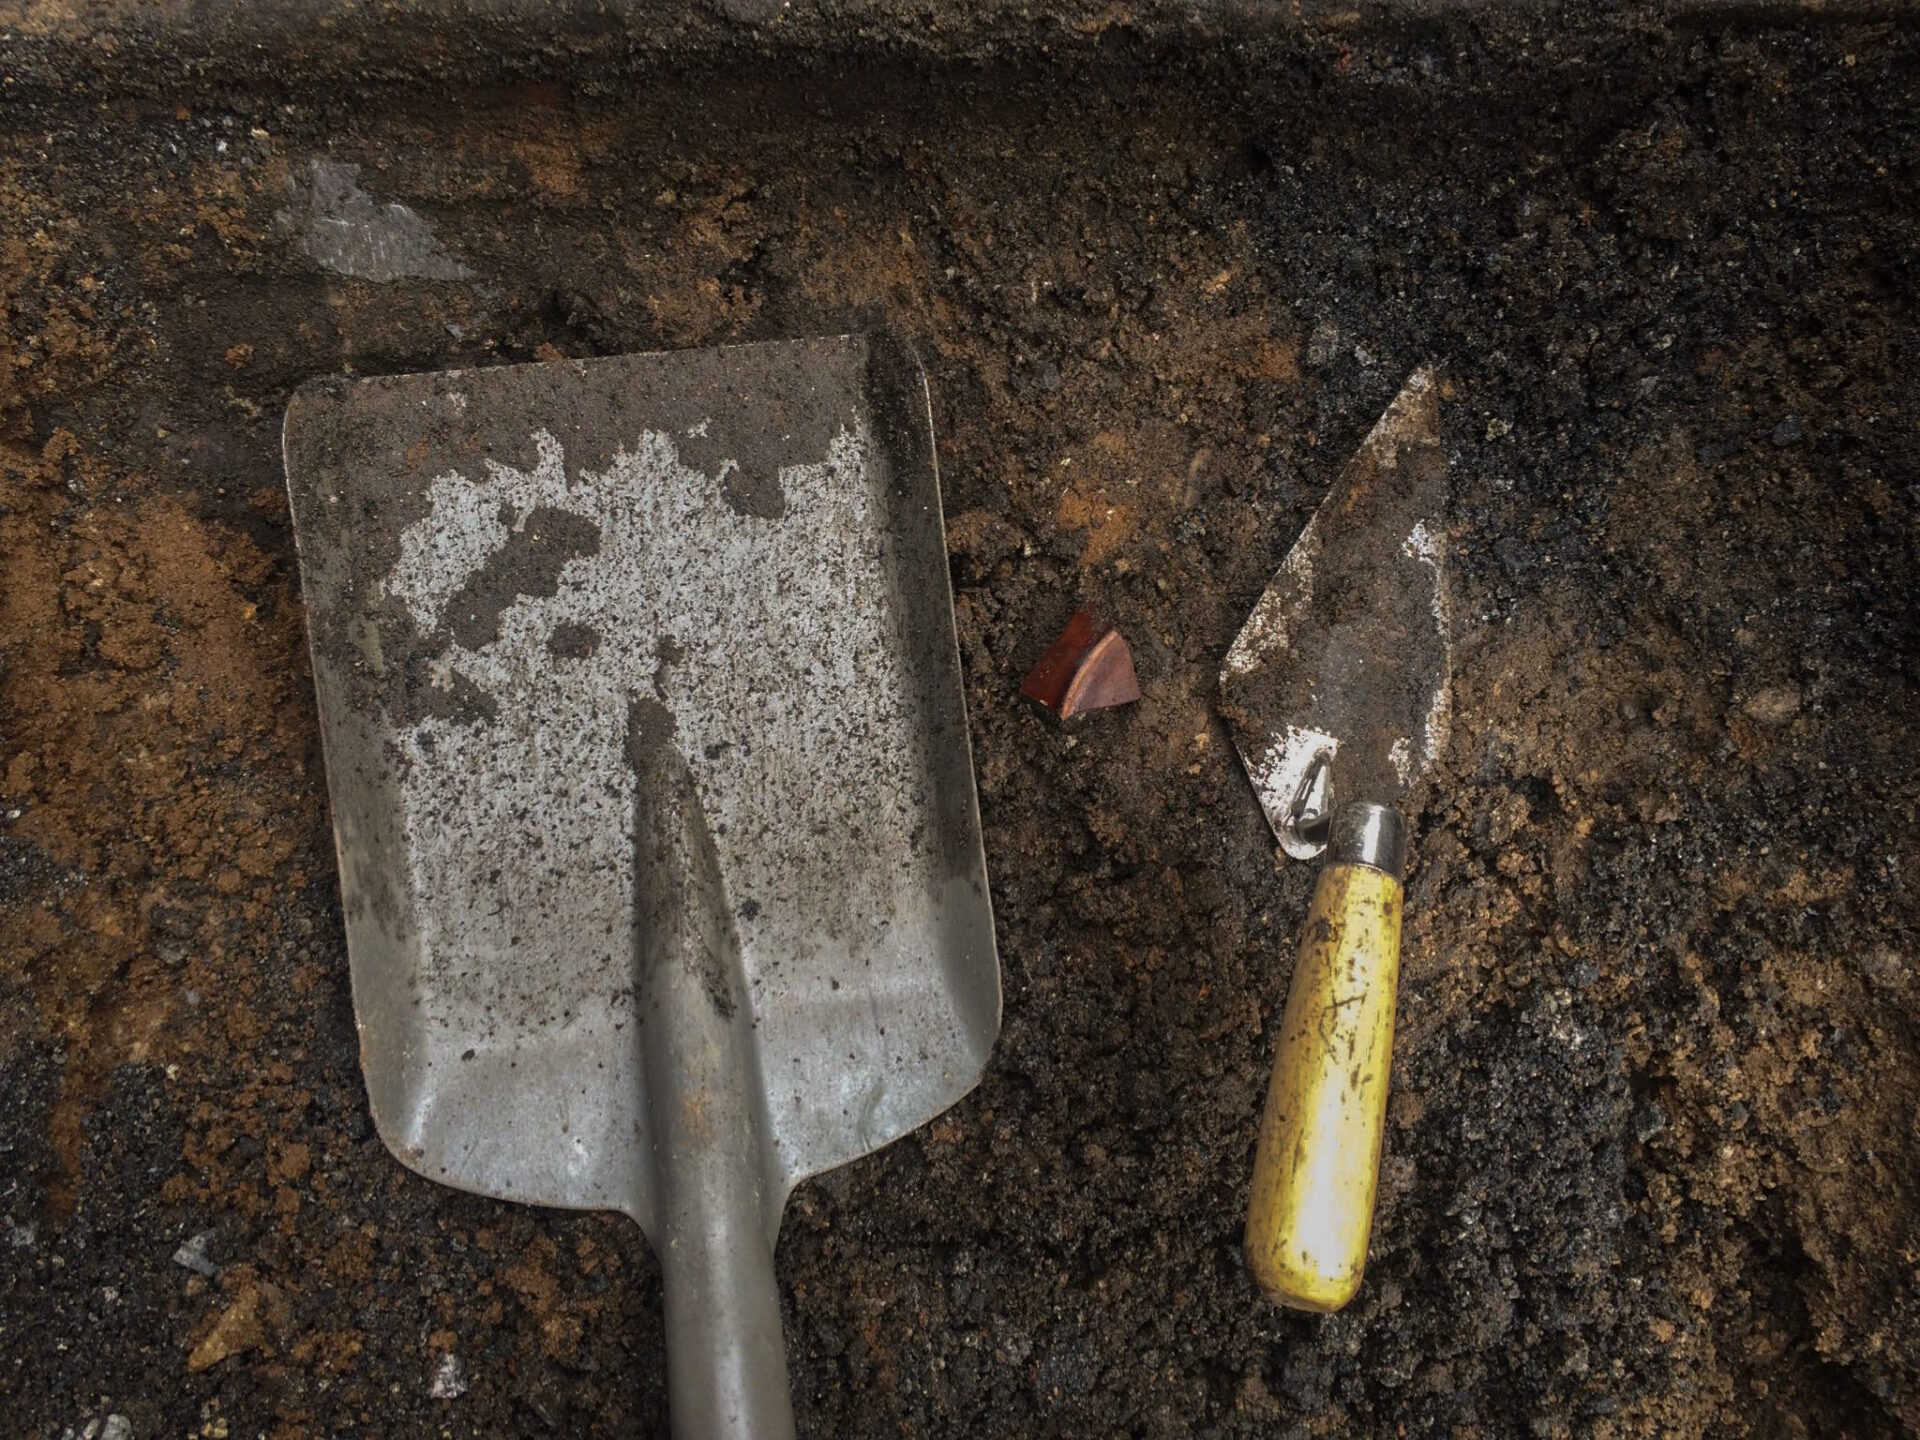 A piece of red ceramics in between a small shovel on the left and a trowel on the right.